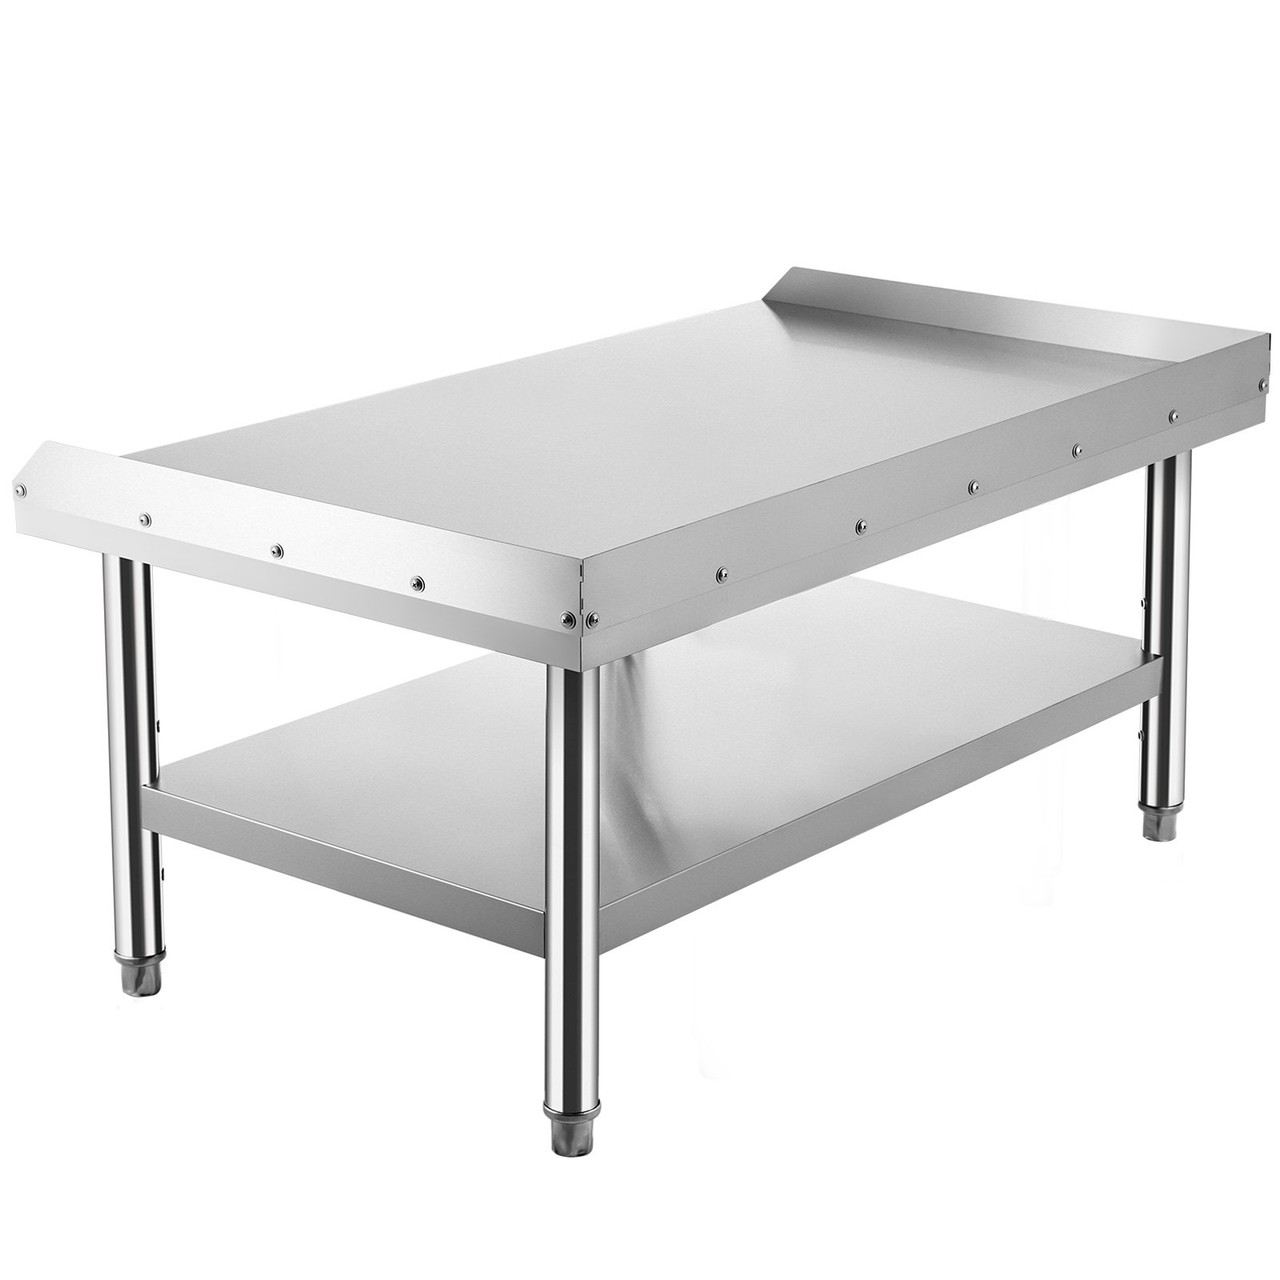 VEVOR Stainless Steel Equipment Grill Stand, 48 x 30 x 24 Inches